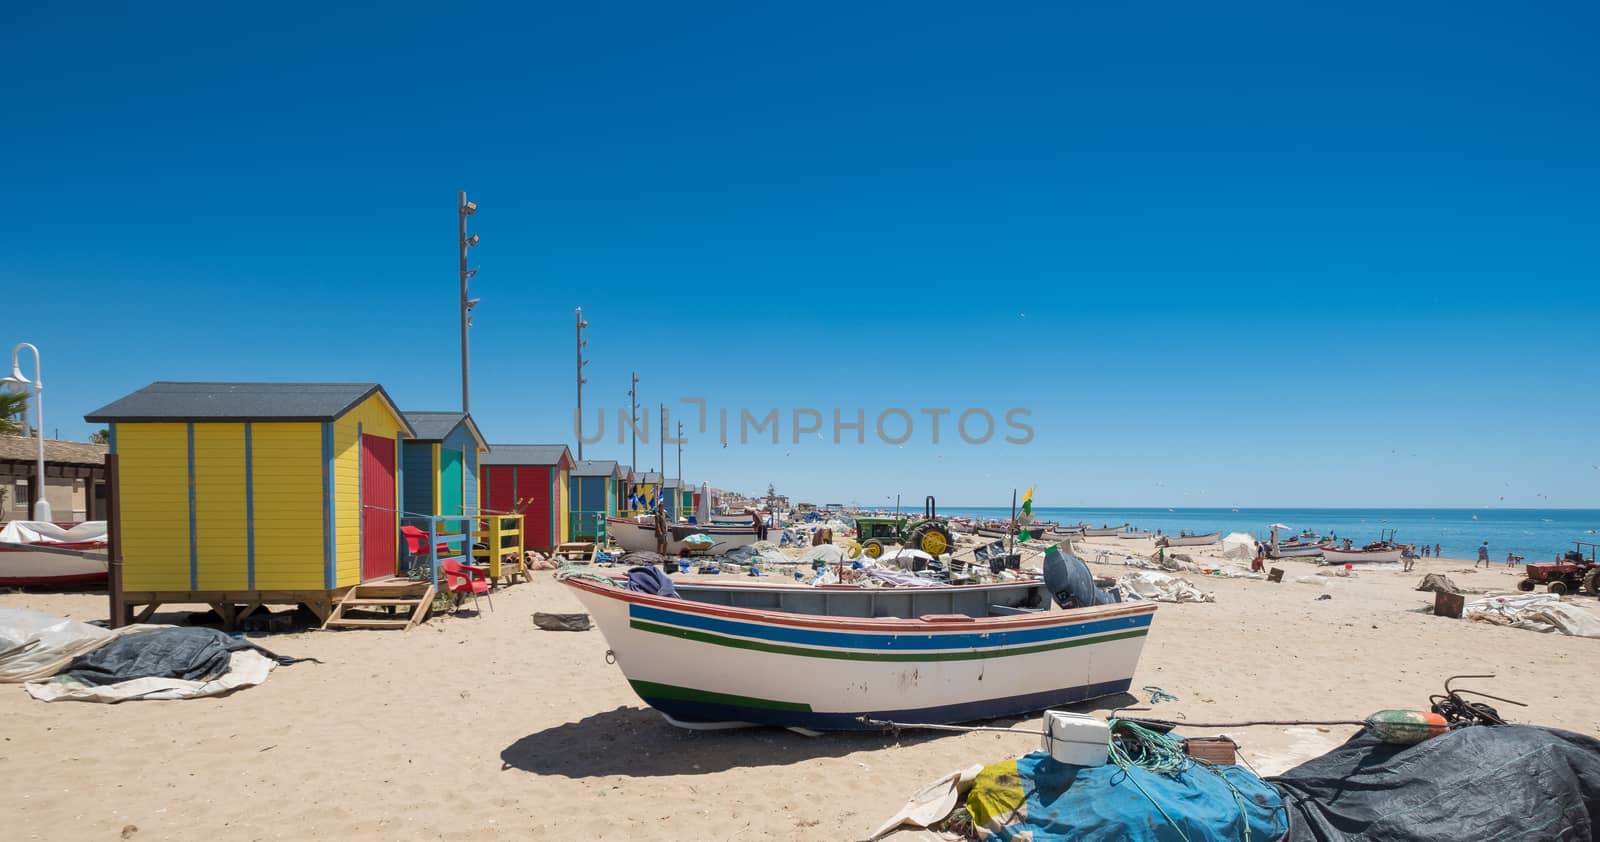 Typical fishermen's huts in the fishing village of La Antilla, in Huelva, Andalusia. Spain